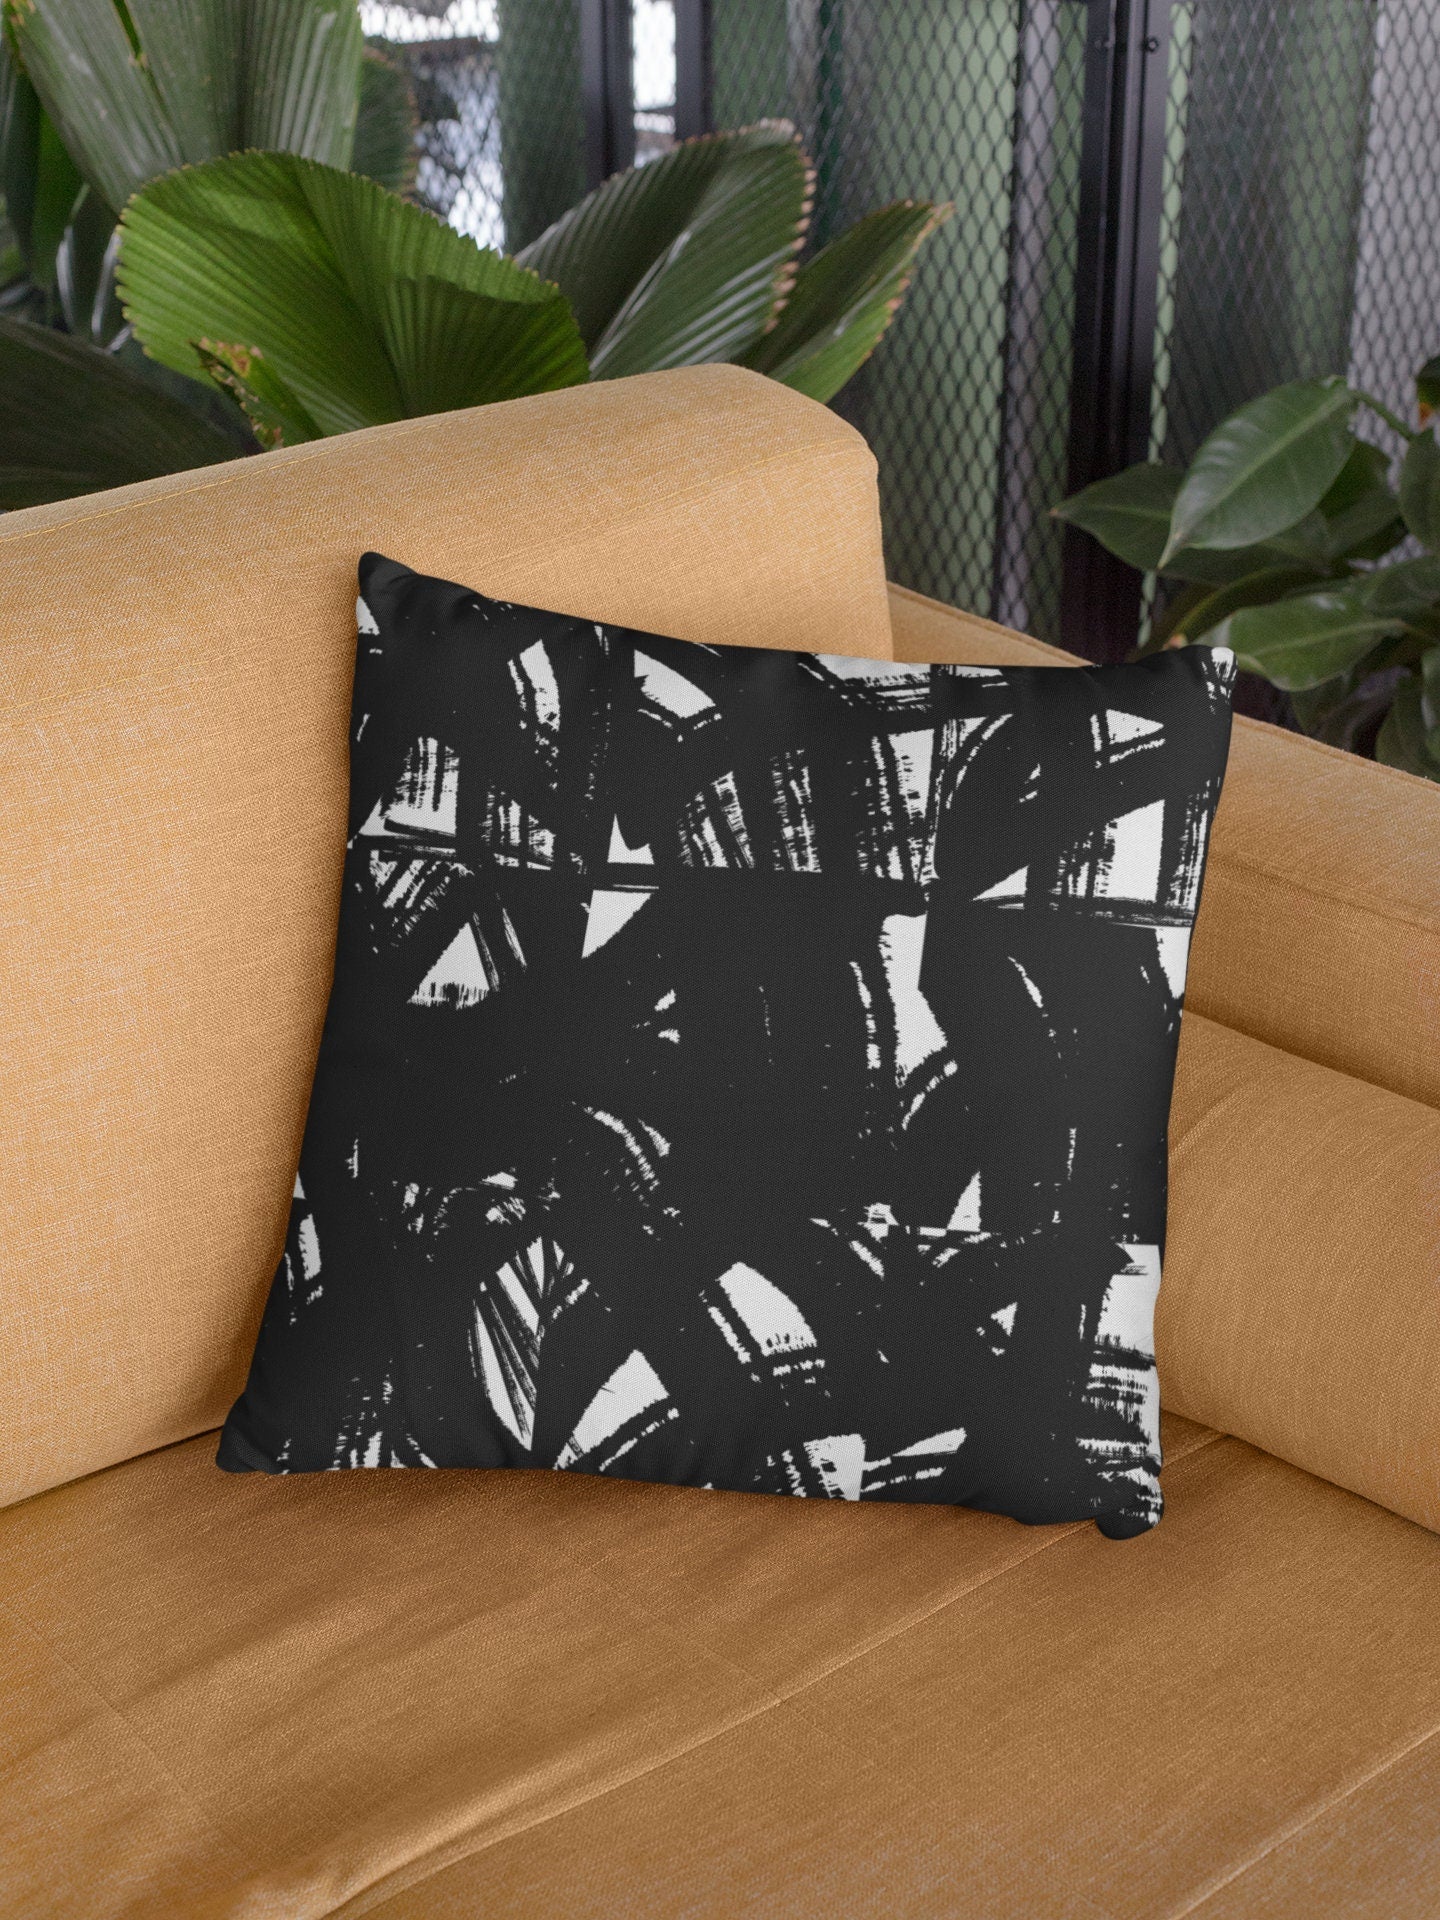 Black Pillow Cover - Grunge Style